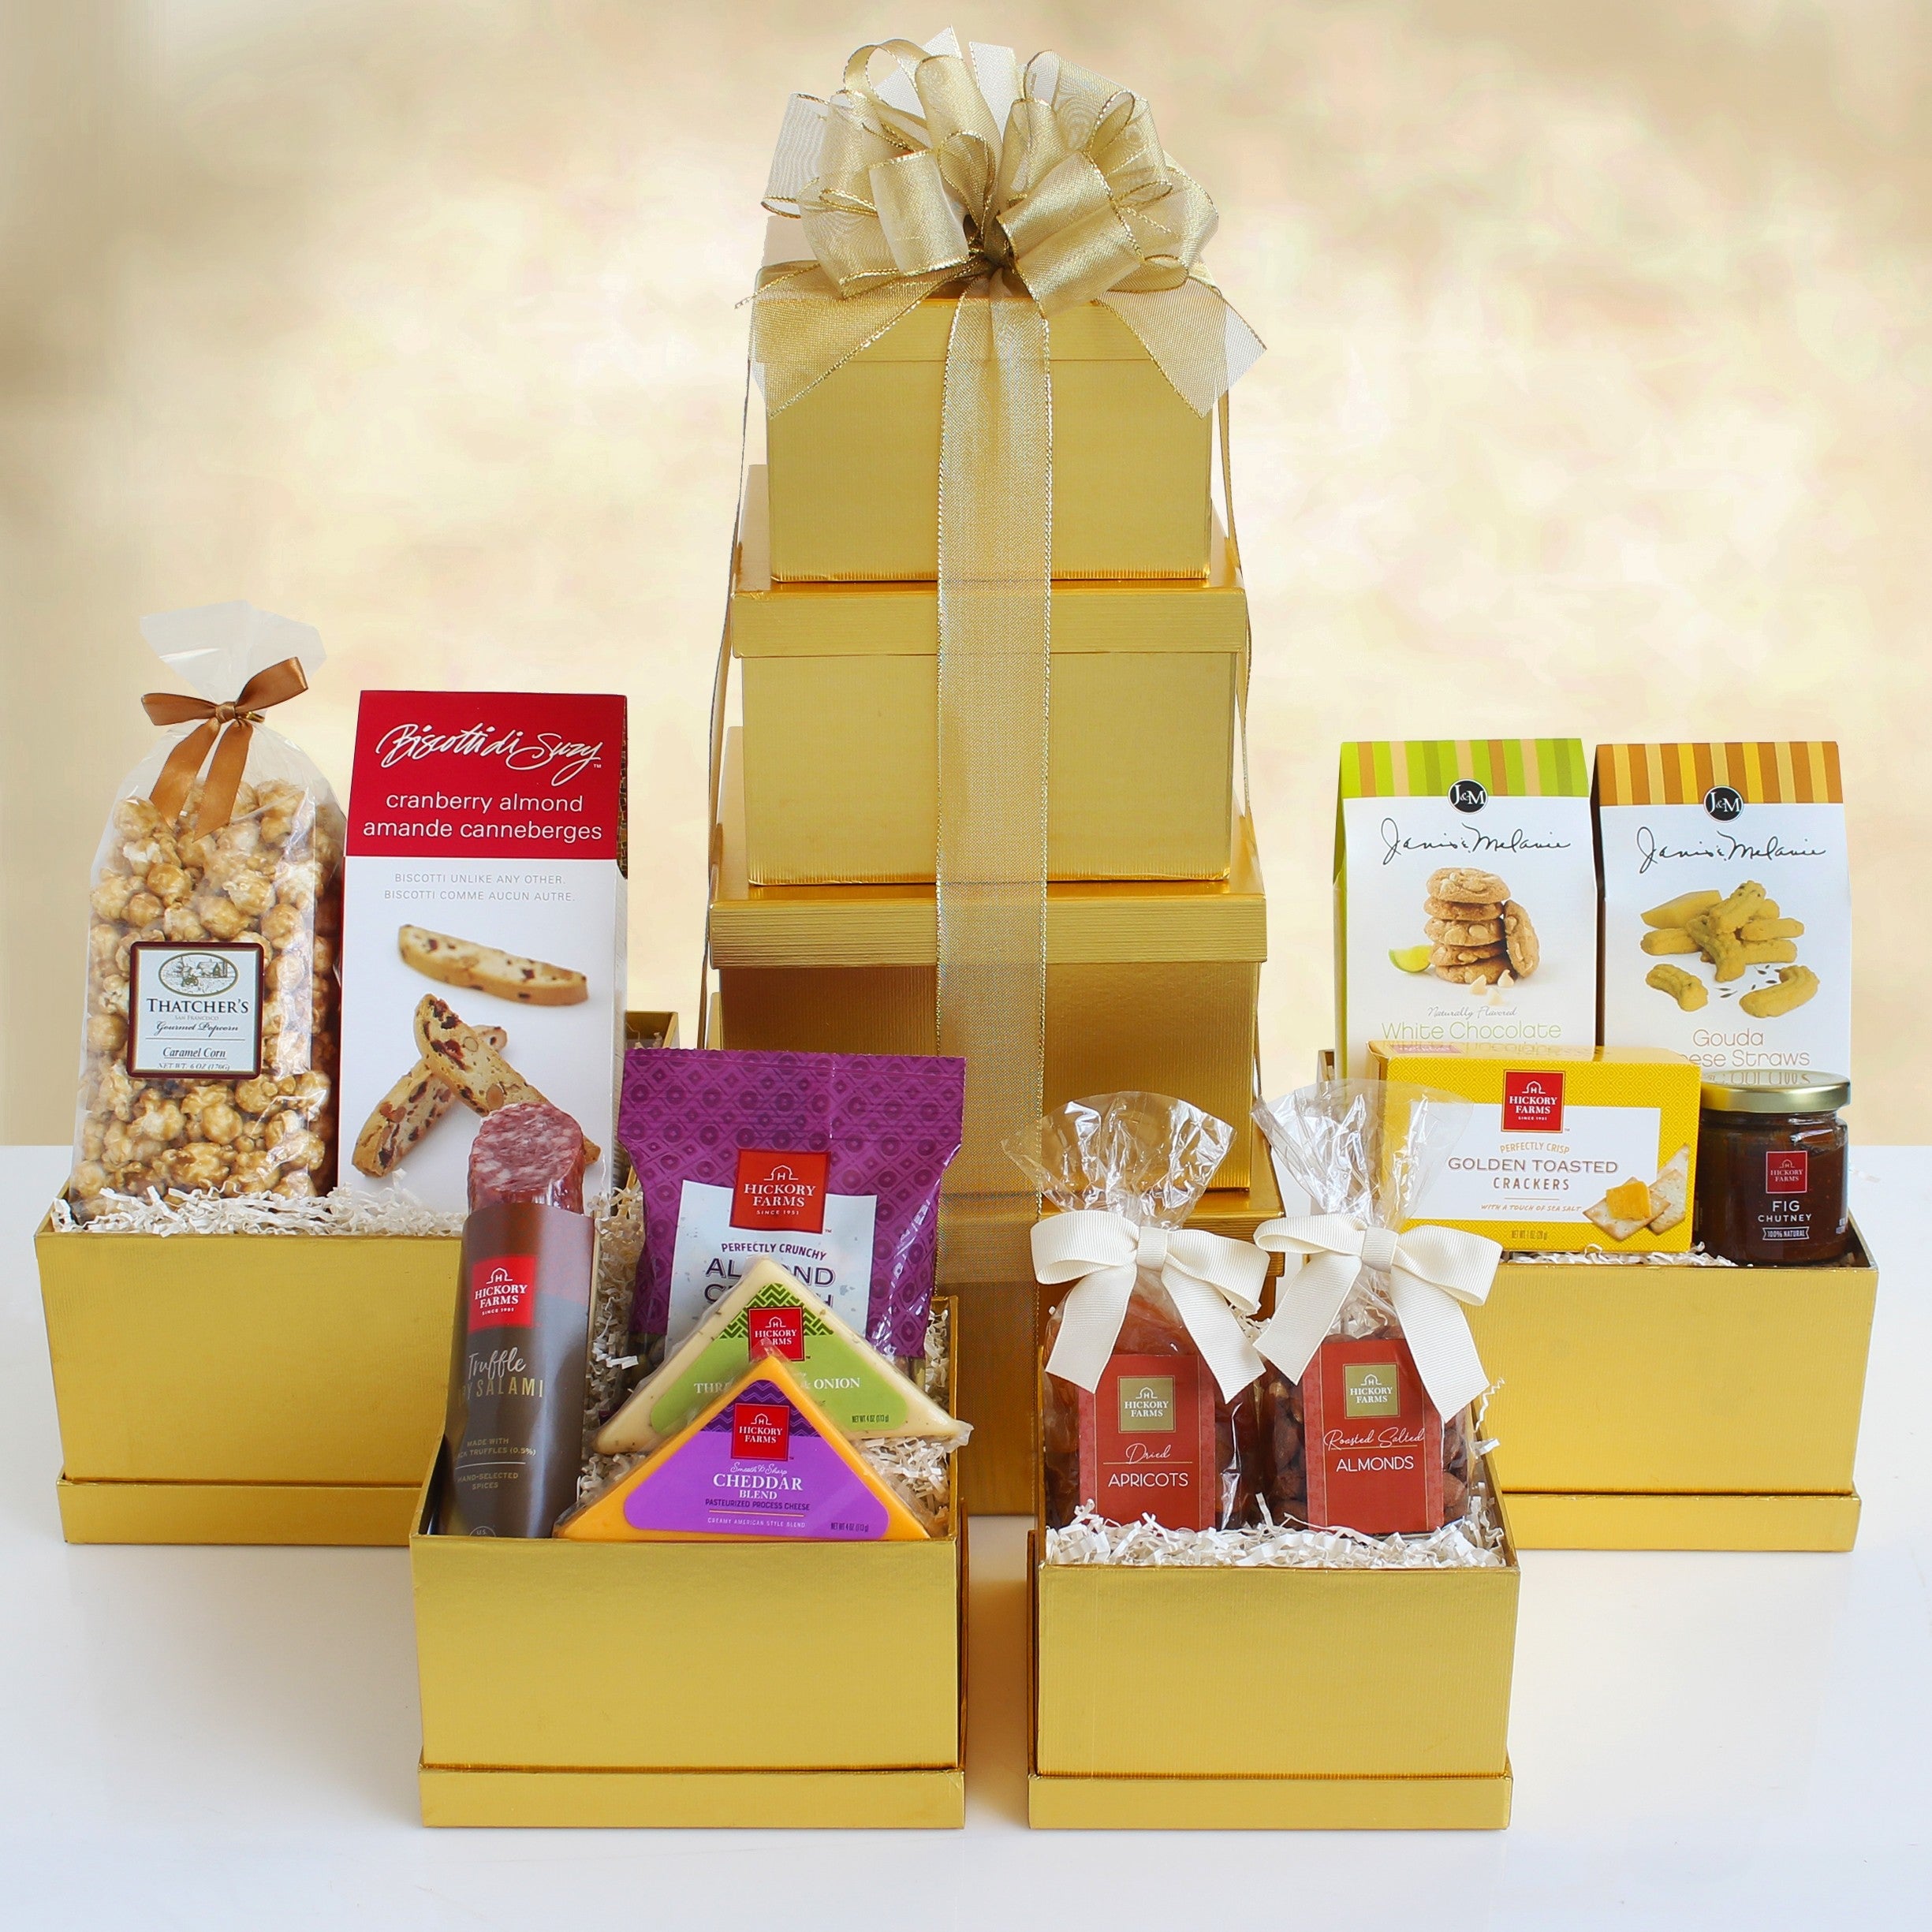 Tremendous Treats: Mother's Day Gourmet Gift Tower